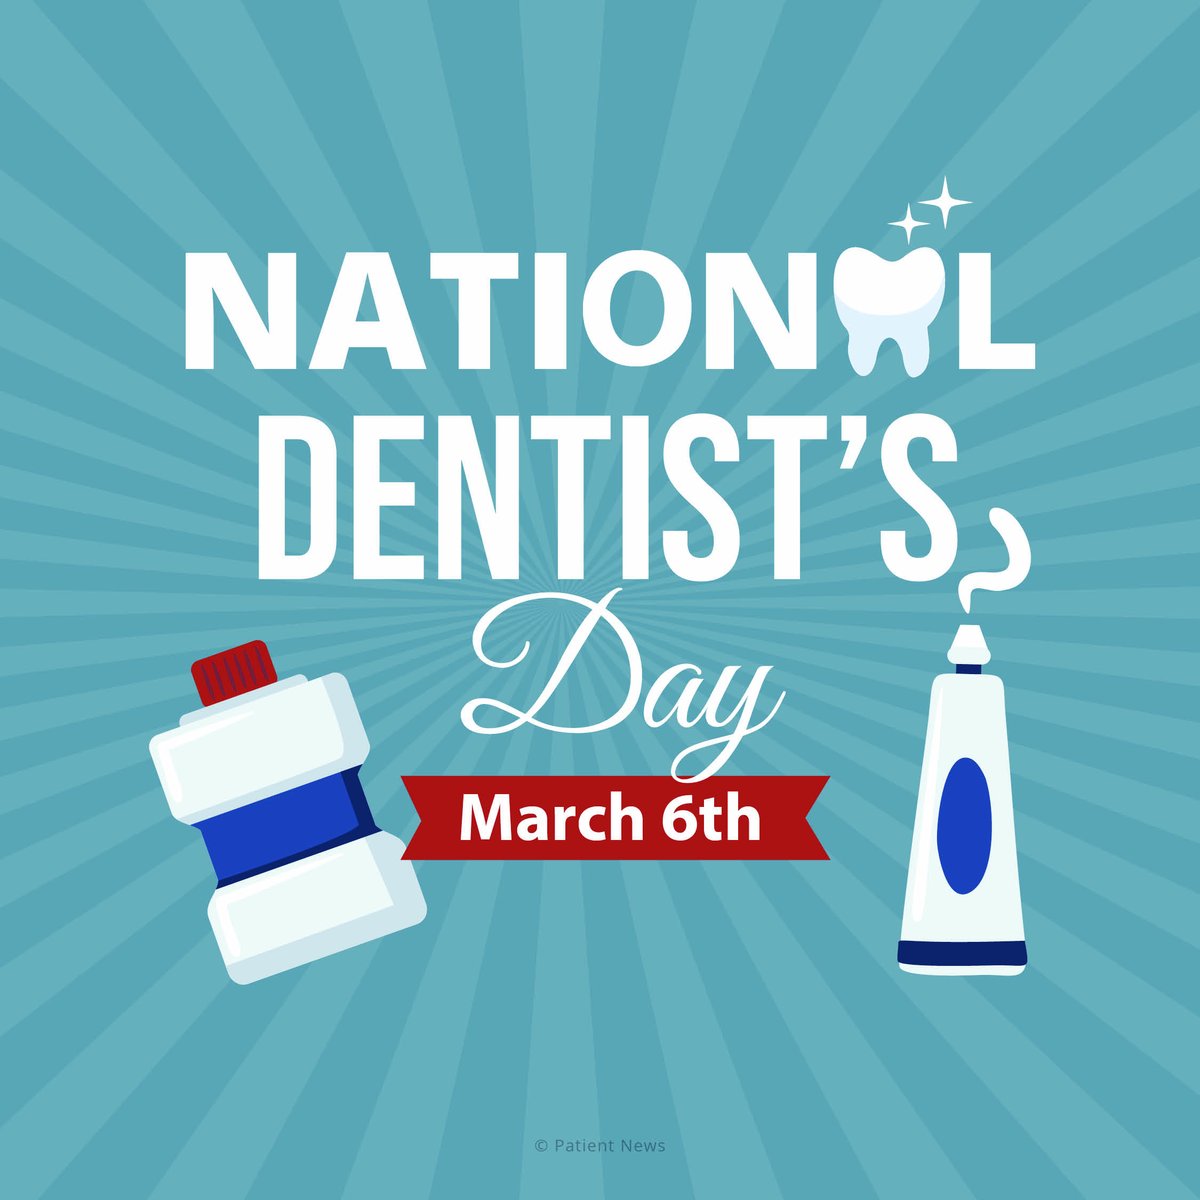 The best part of today is knowing we can help you smile your best smile, with optimum health and confidence. Thank you so much for your trust. You mean with world to us! #nationaldentistday #smile #GroveCityDental #GroveCityDentist #centerforsedation #cosmeticdentistry #comfo ... https://t.co/9dPeOECTKk